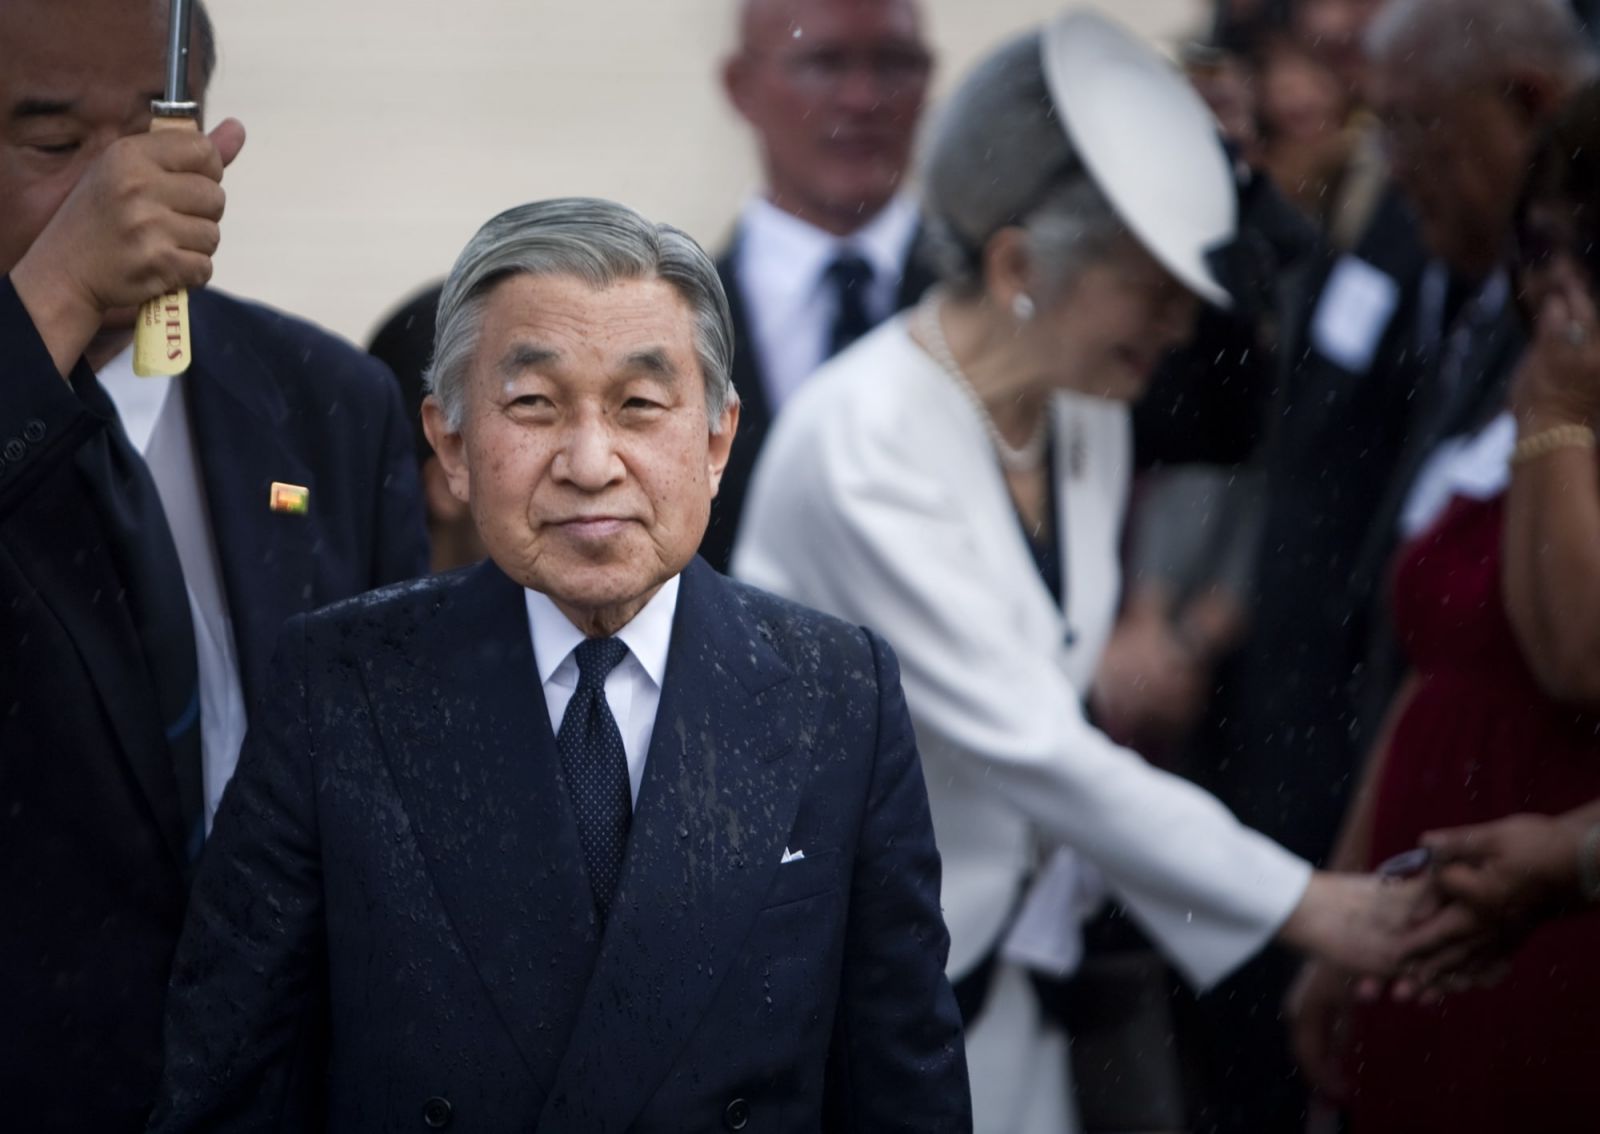 After a 30-year reign, the Japanese Emperor Akihito will abdicate on April 30.